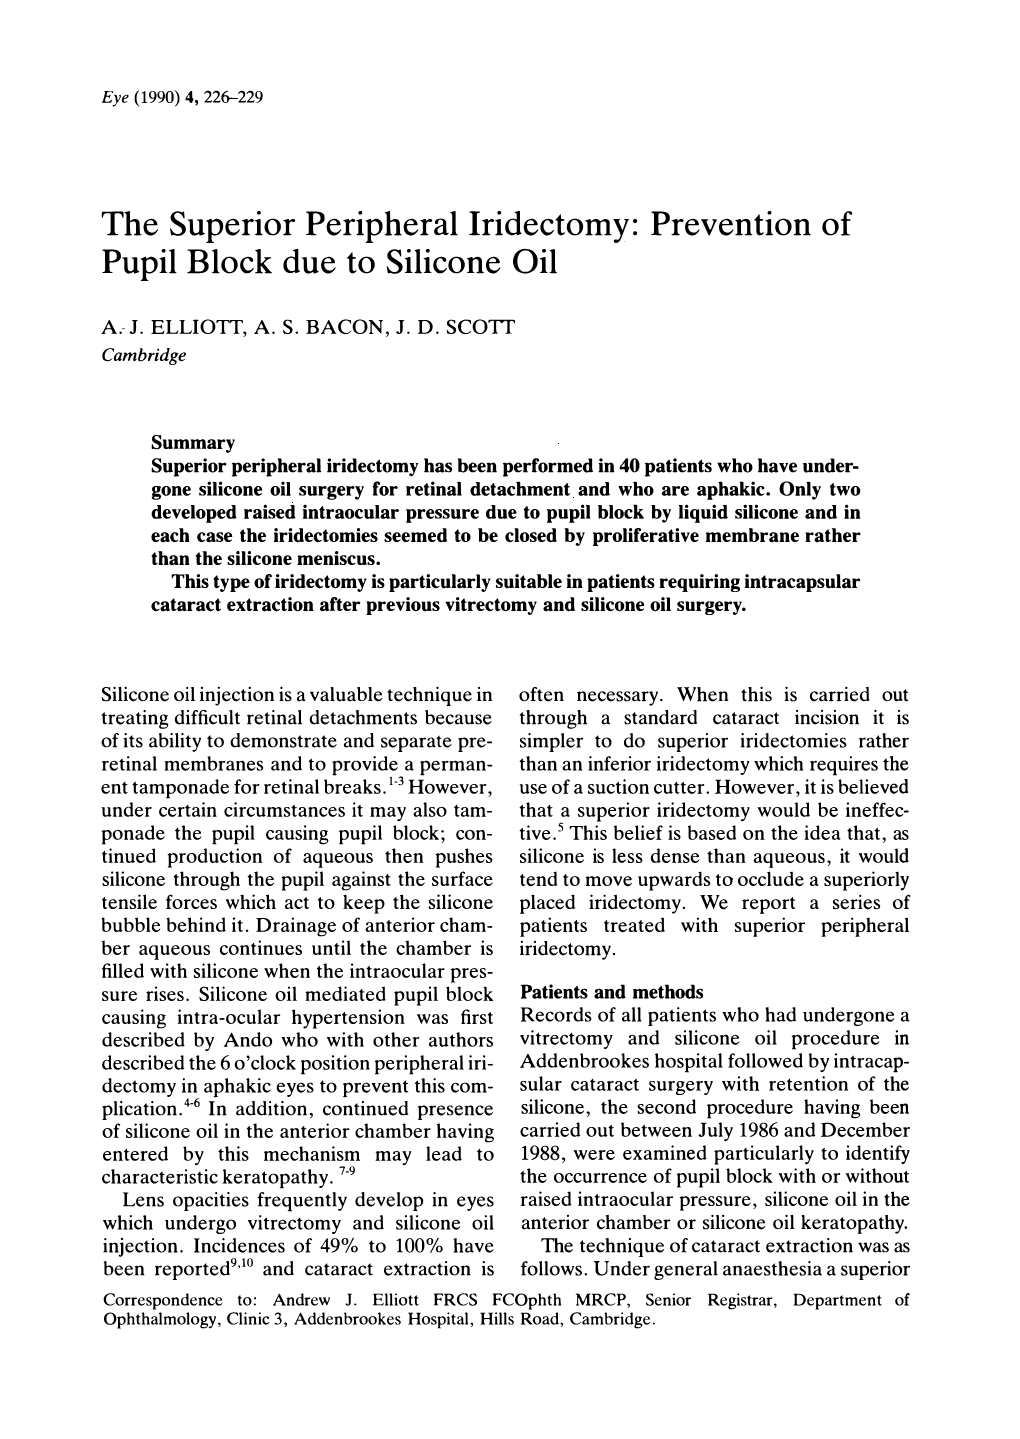 The Superior Peripheral Iridectomy: Prevention of Pupil Block Due to Silicone Oil